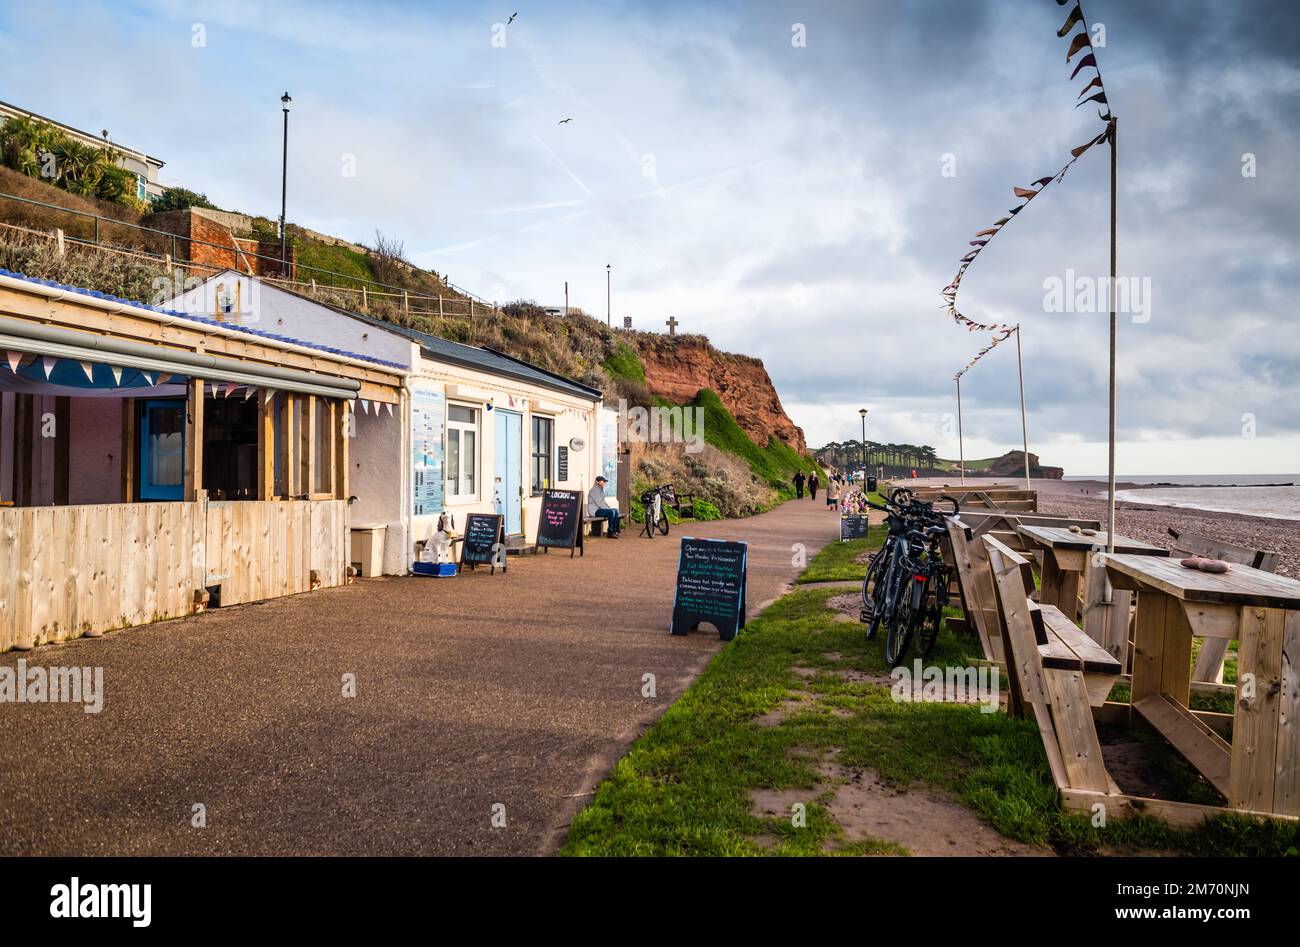 Longboat Cafe at Budleigh recently appearing on Spotlight and BBC Breakfast. Stock Photo